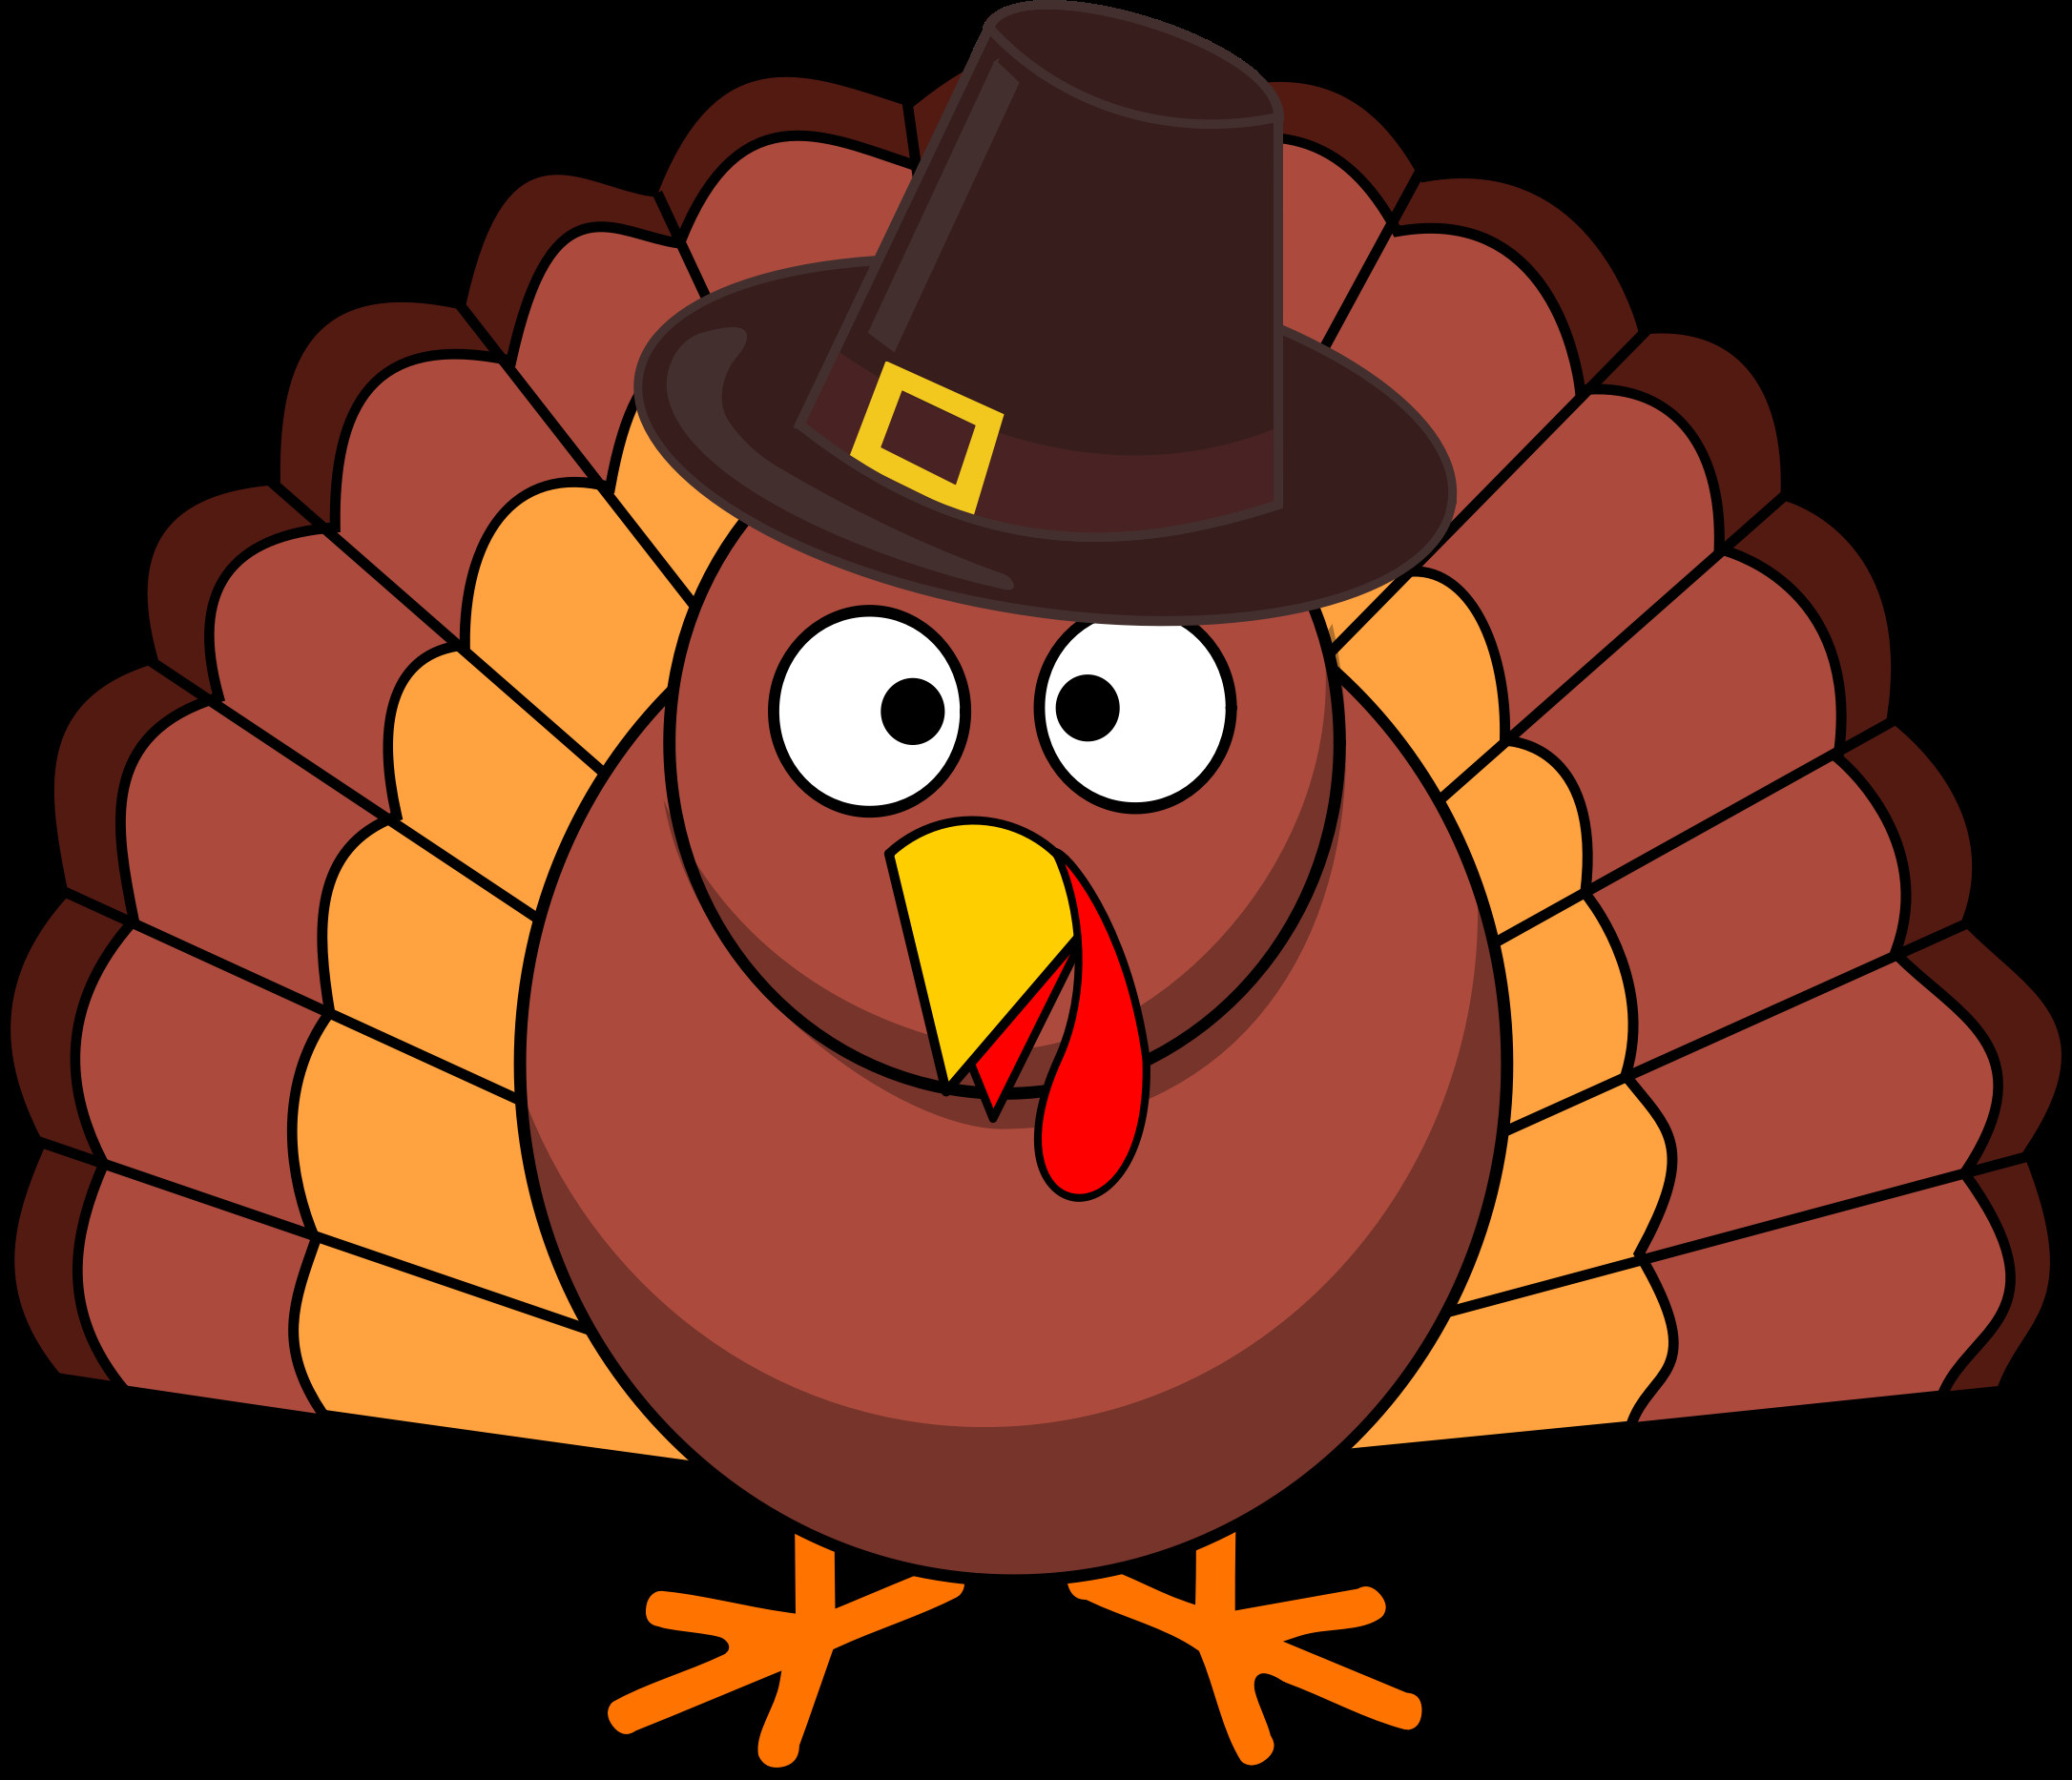 Thanksgiving Turkey Cartoon
 Try timing your Thanksgiving turkey the Spotify way It’s